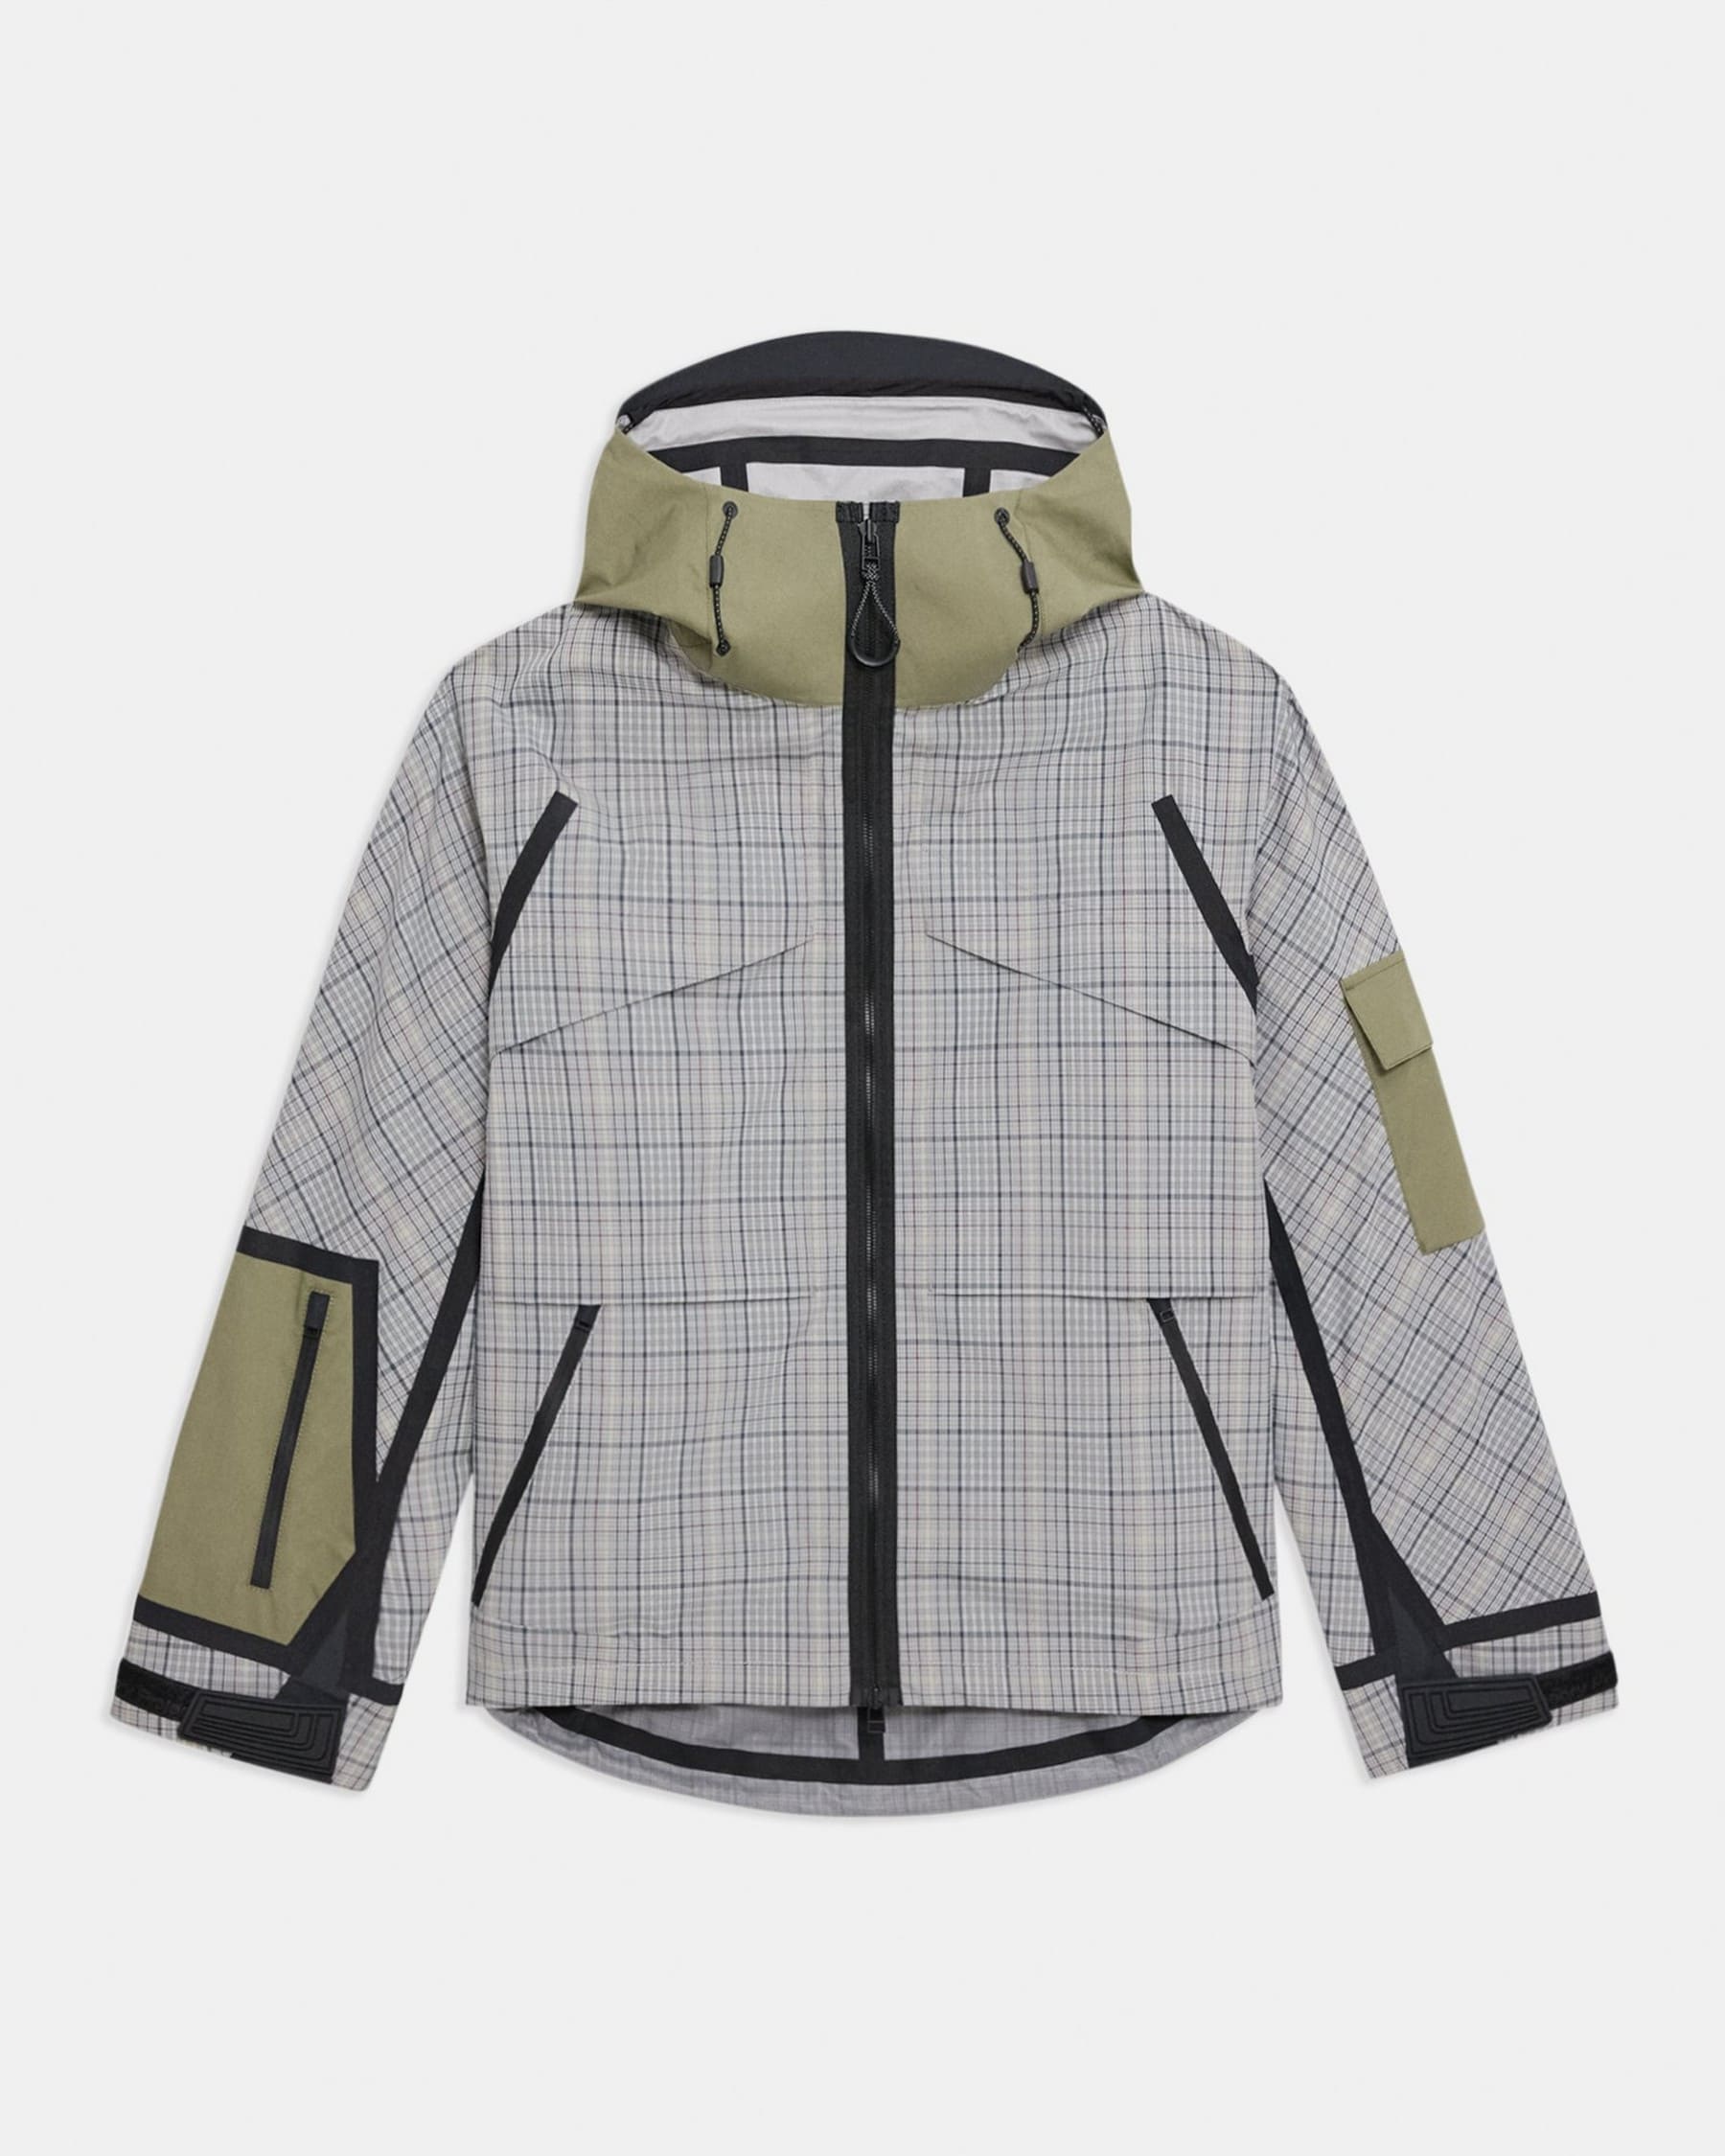 Backed Jacket in Cotton Check